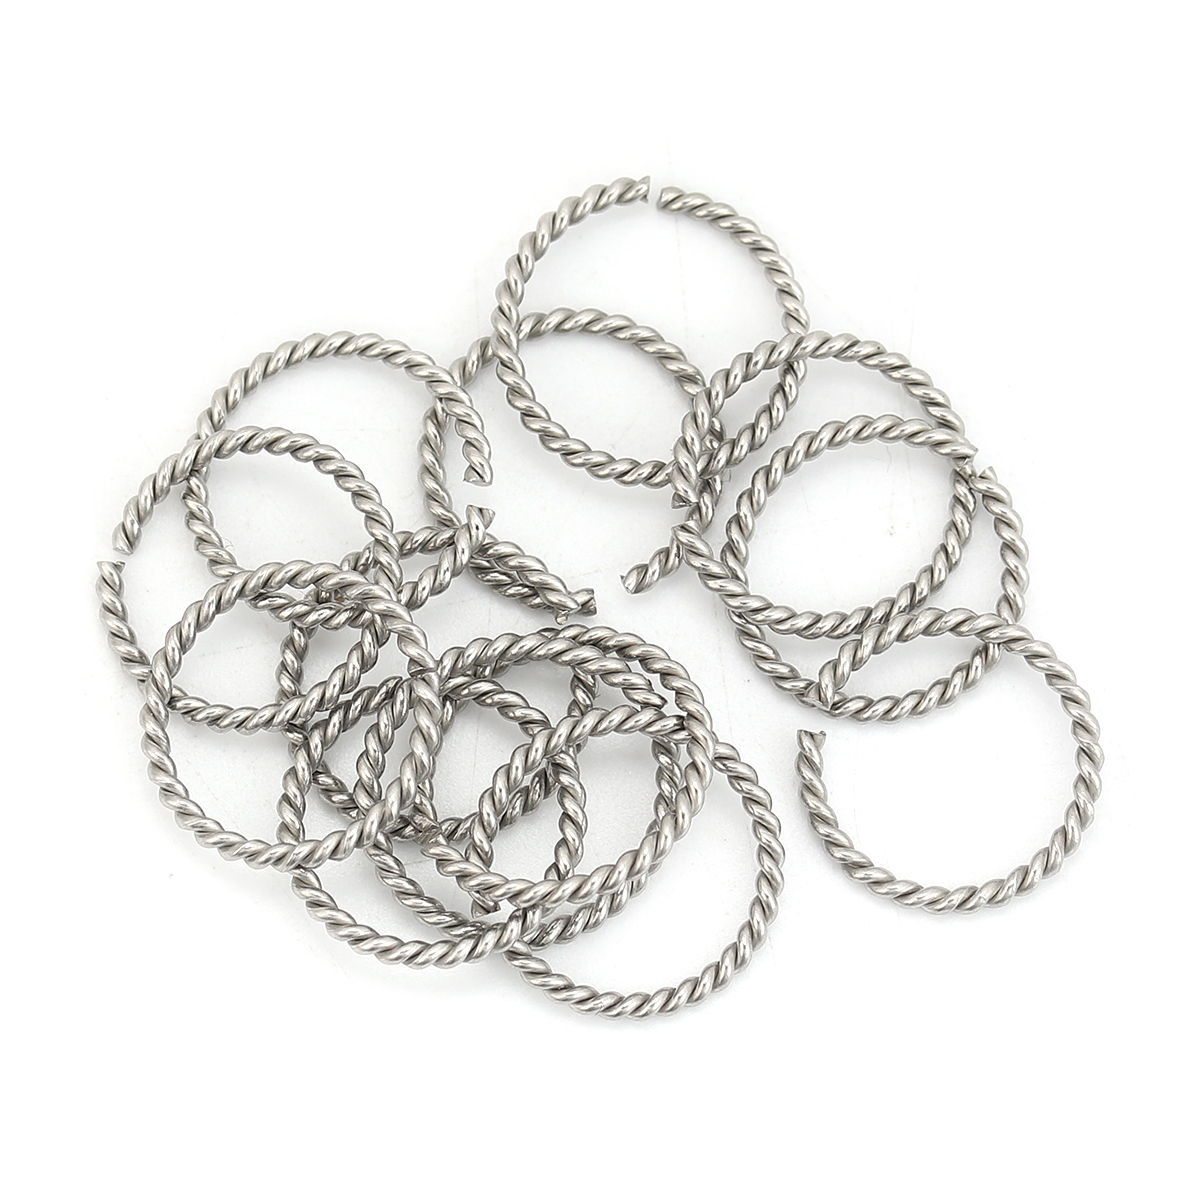 Picture of 1.5mm 304 Stainless Steel Opened Jump Rings Findings Braided Silver Tone 16mm( 5/8") Dia., 20 PCs